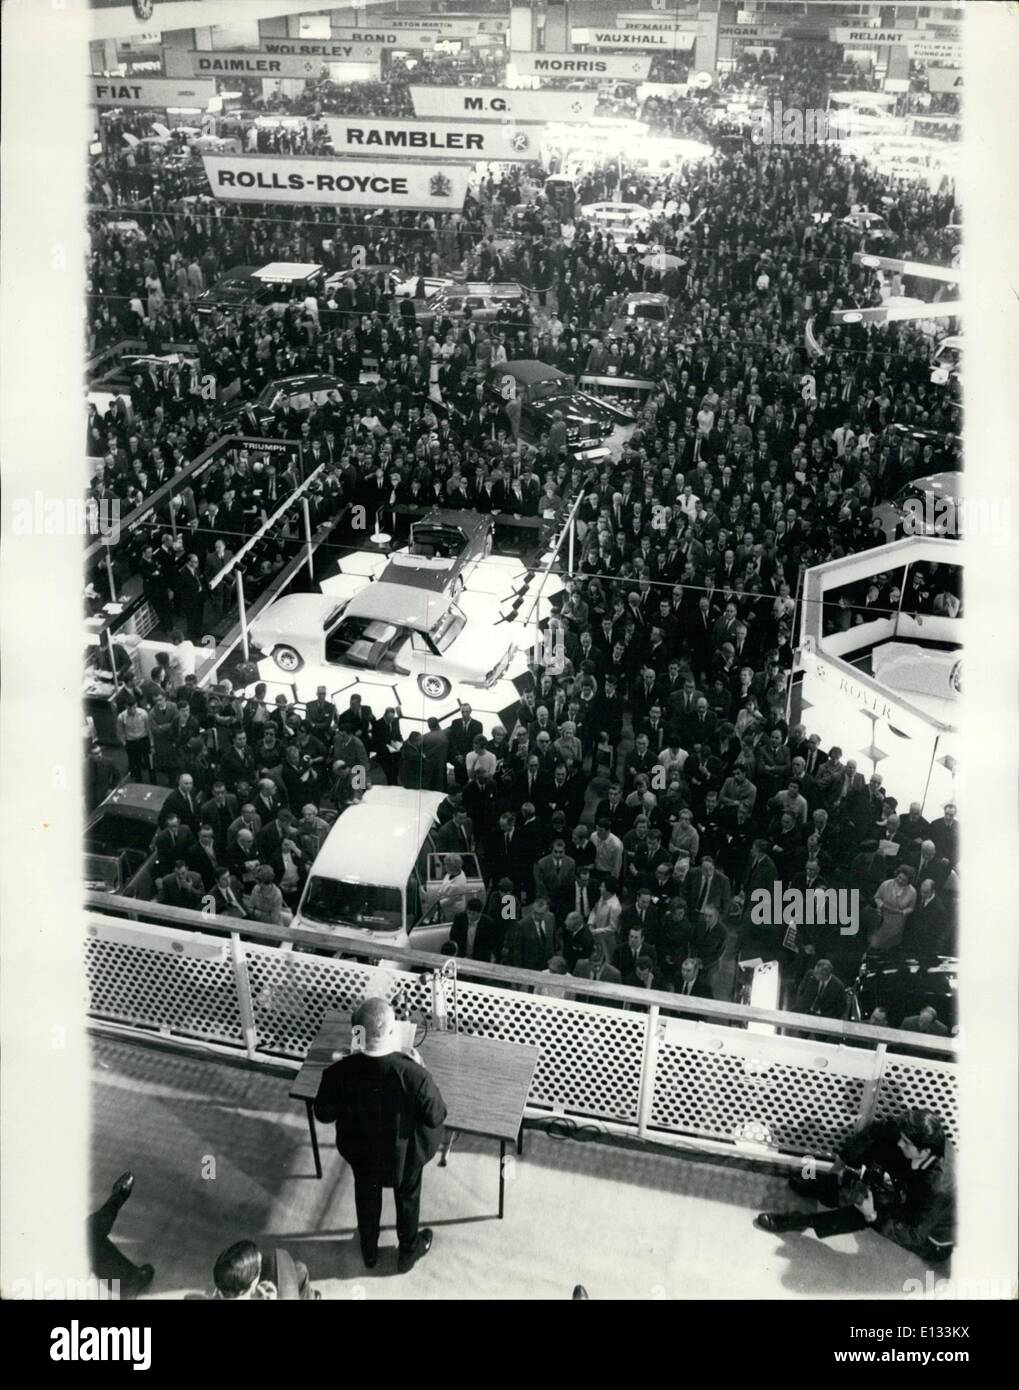 Feb. 26, 2012 - Opening of the motor show; The 1969 Motor show was opened at Earls Court, London today, by Sir Leslie O'Erien, G.B.E., Governor of t he Bank of England. Photo Shows General view at Earls Court as Sir Leslie O'Brien opened the Motor show today. Stock Photo